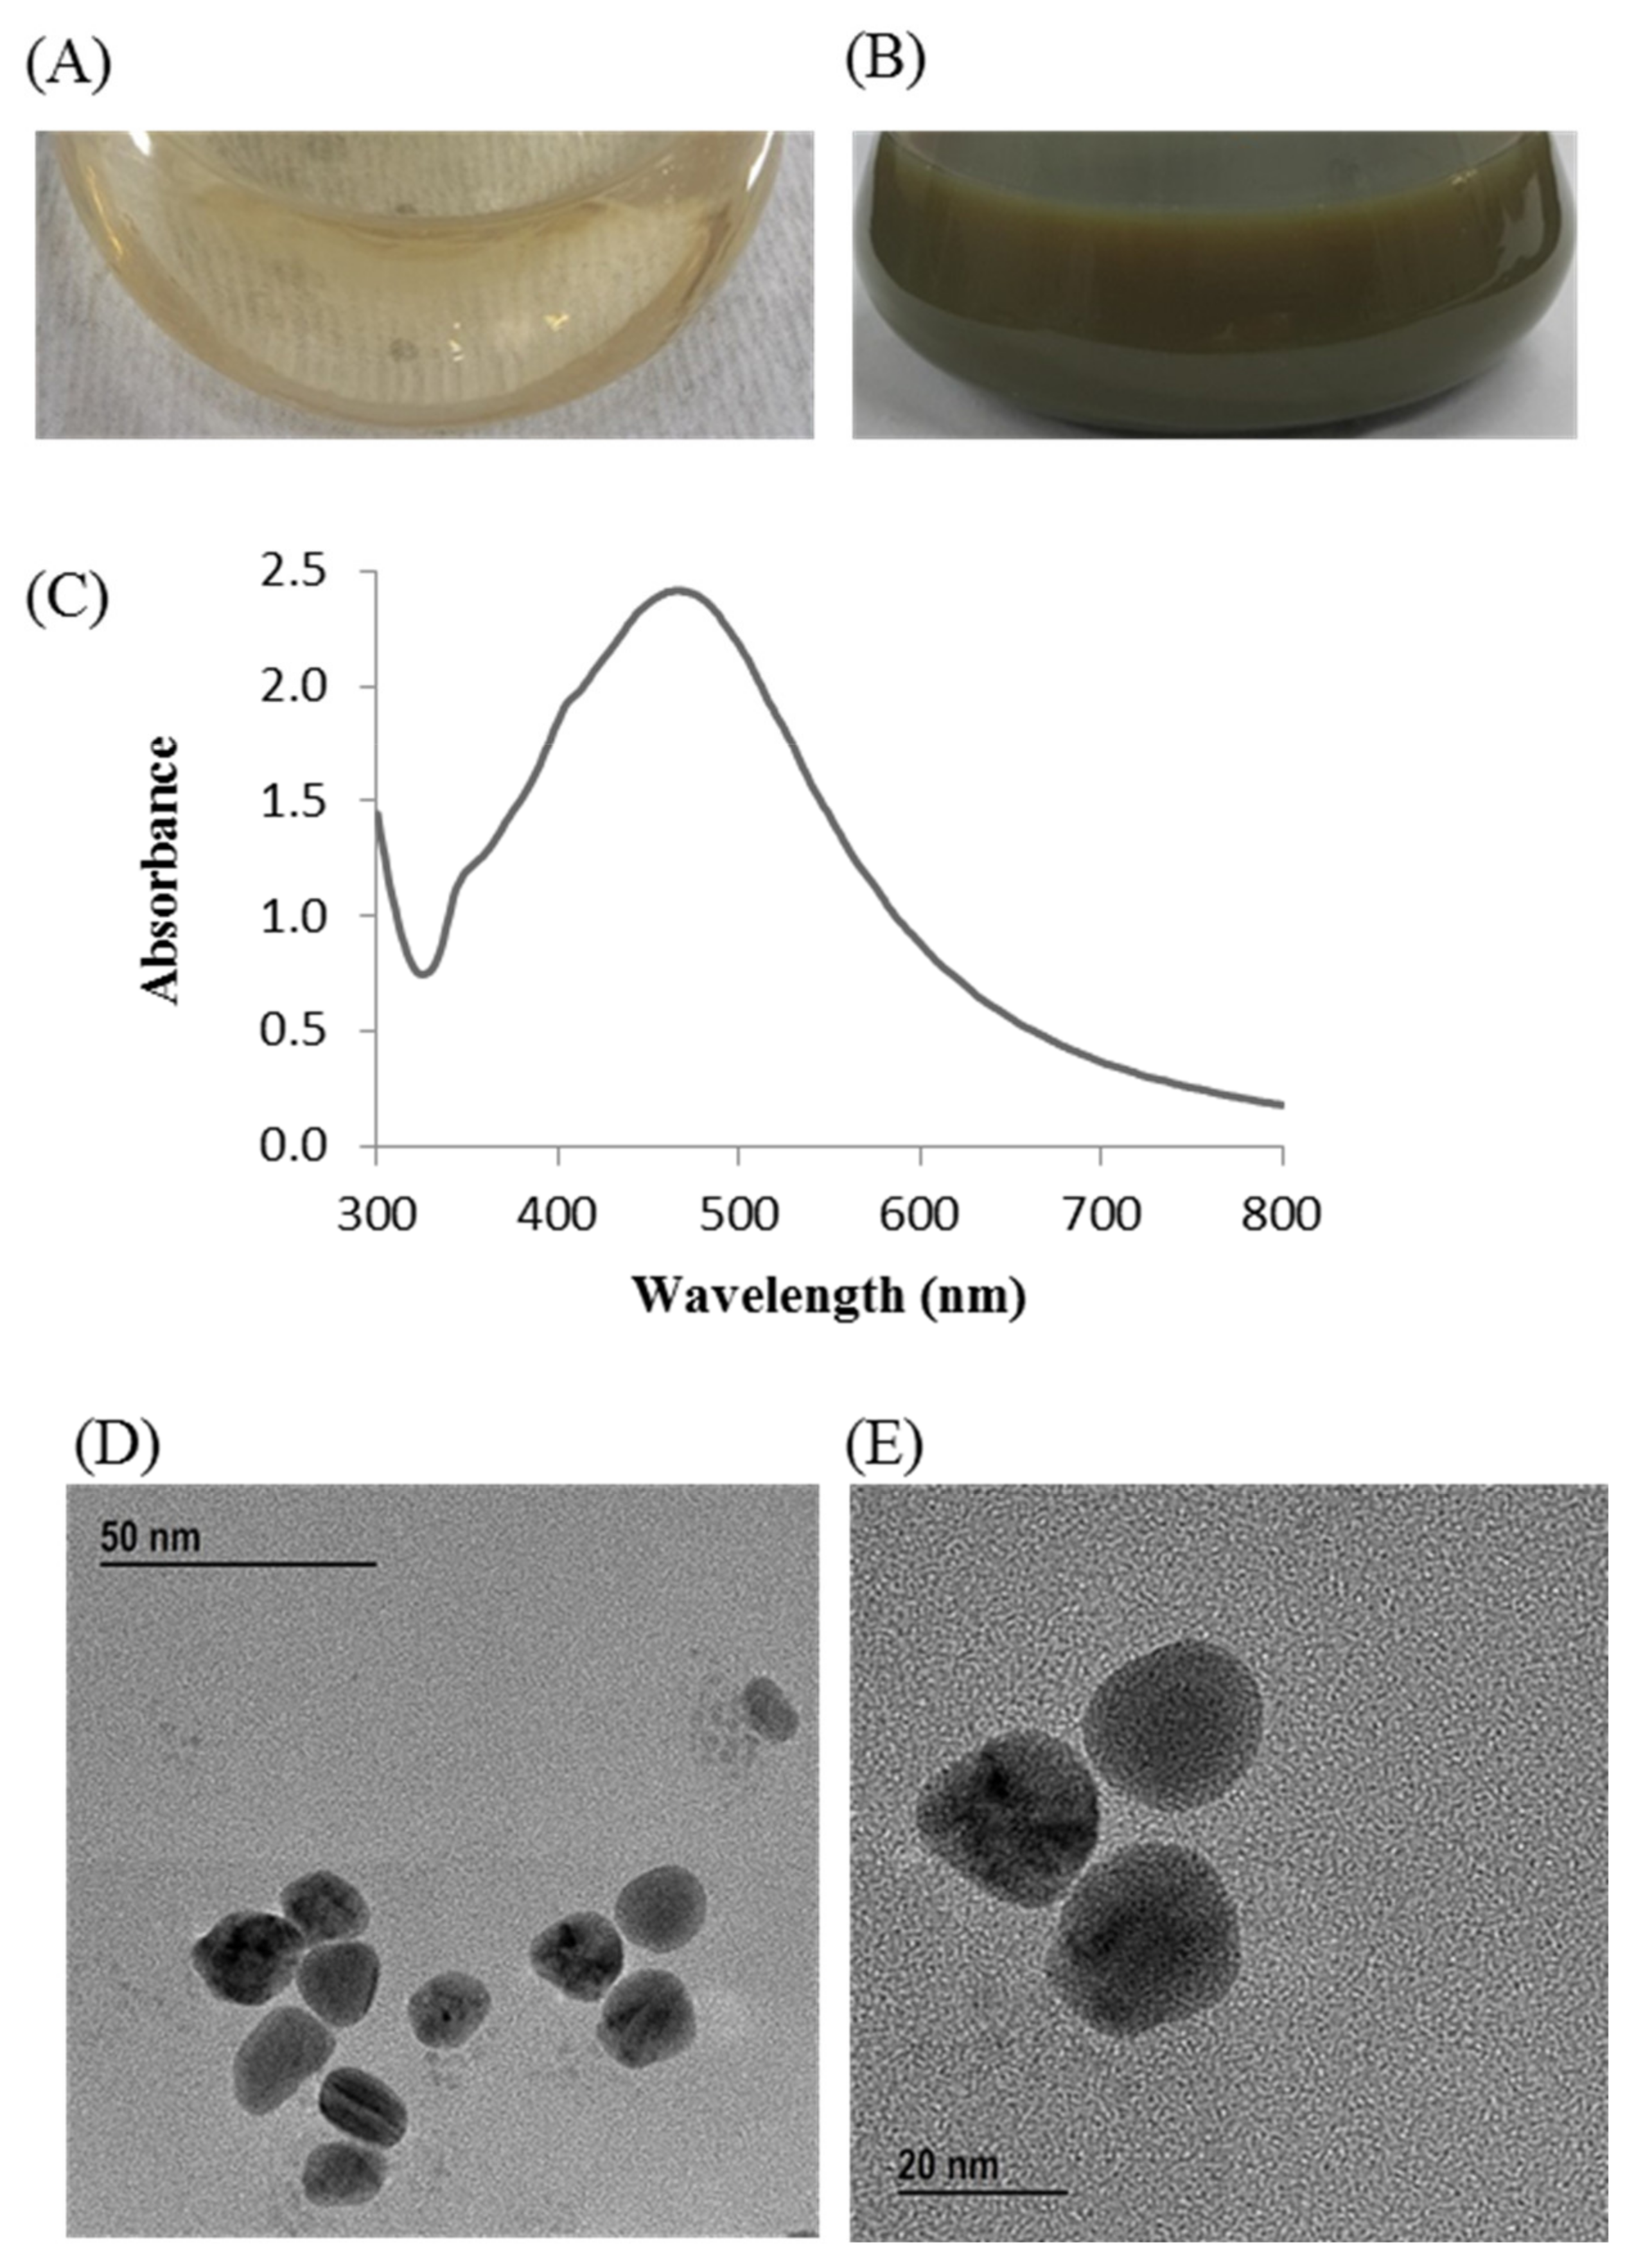 Materials Free Full Text Bacterial Mediated Rapid And Facile Synthesis Of Silver Nanoparticles And Their Antimicrobial Efficacy Against Pathogenic Microorganisms Html